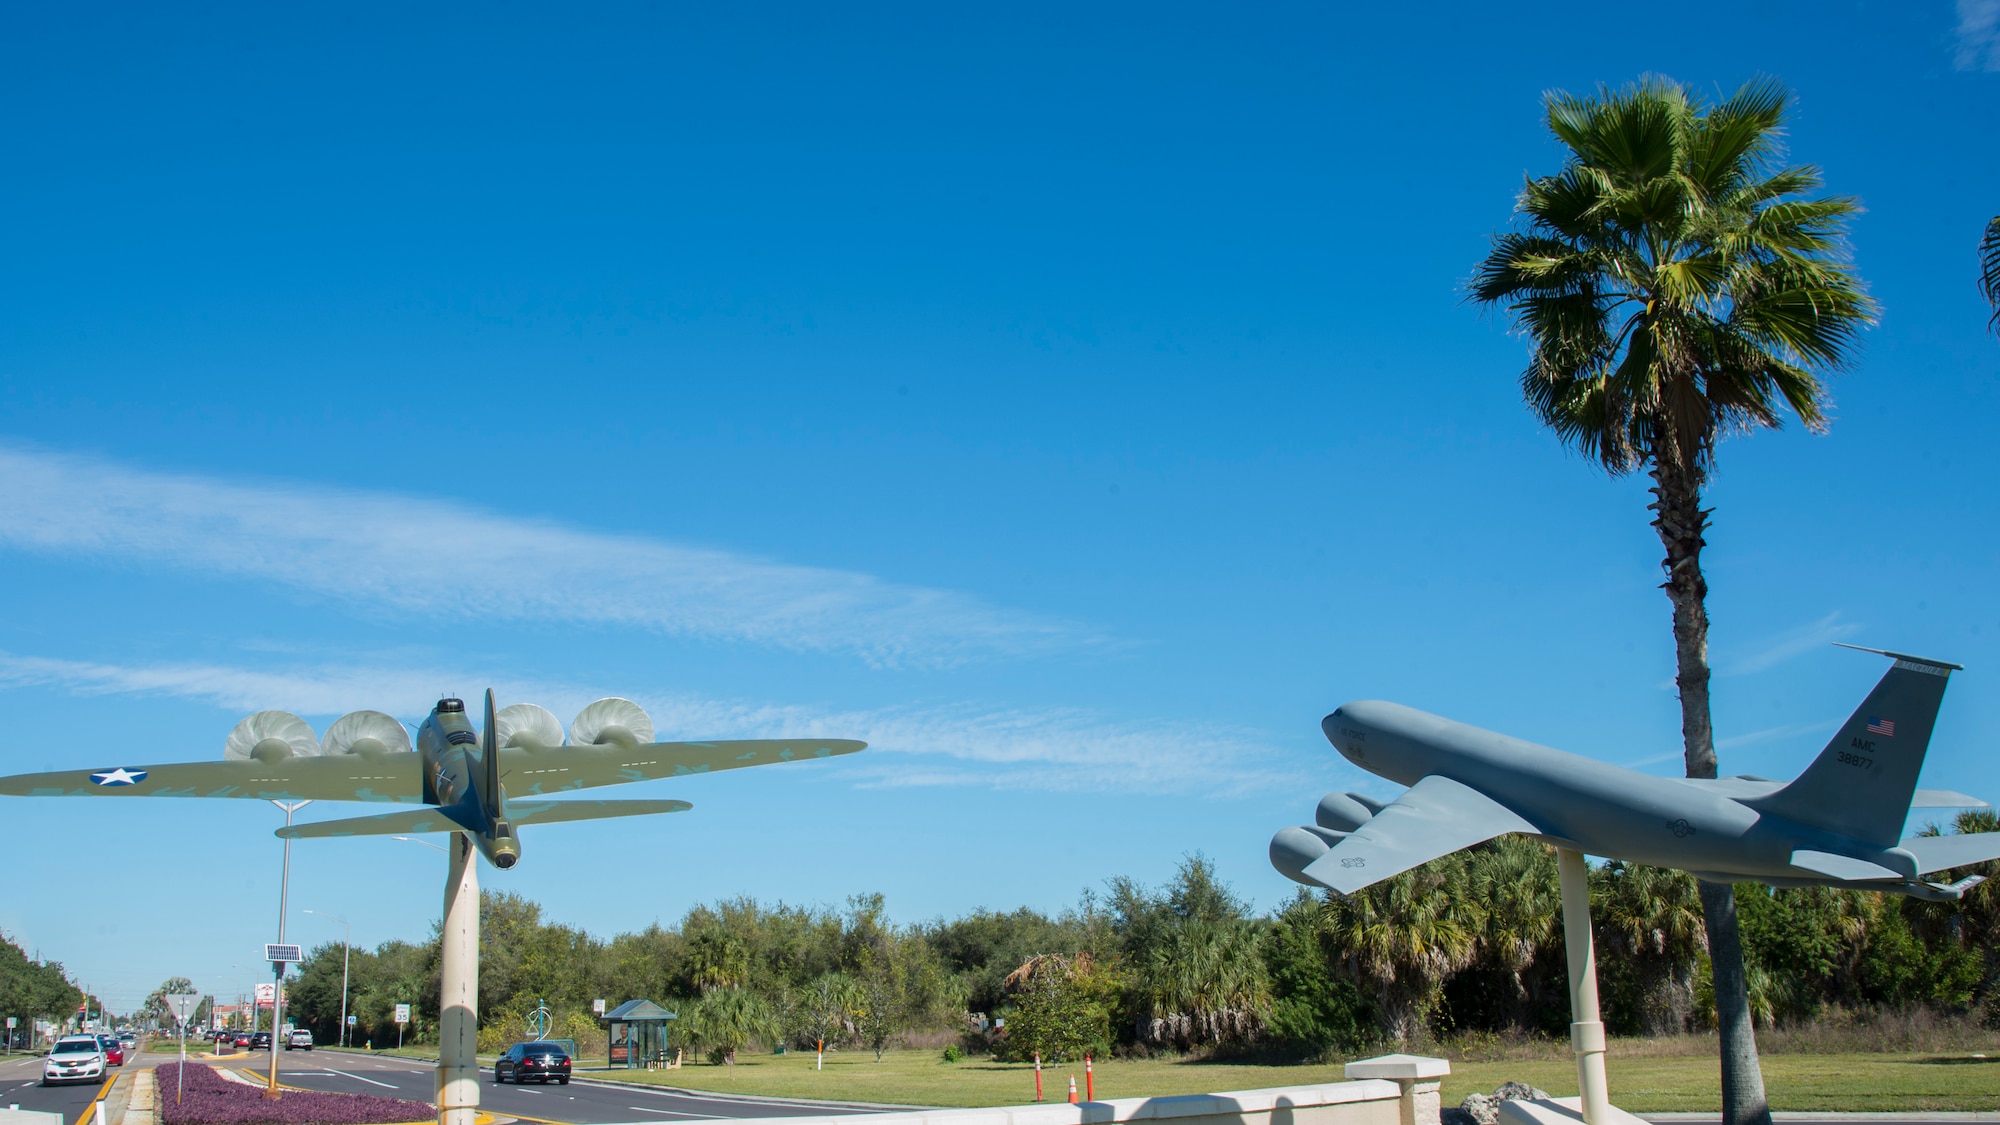 Scale models of the Memphis Belle, a B-17 Flying Fortress, and a KC-135 Stratotanker are displayed near the front gate of MacDill Air Force, Fla. (U.S. Air Force photo by Airman 1st Class Shannon Bowman)